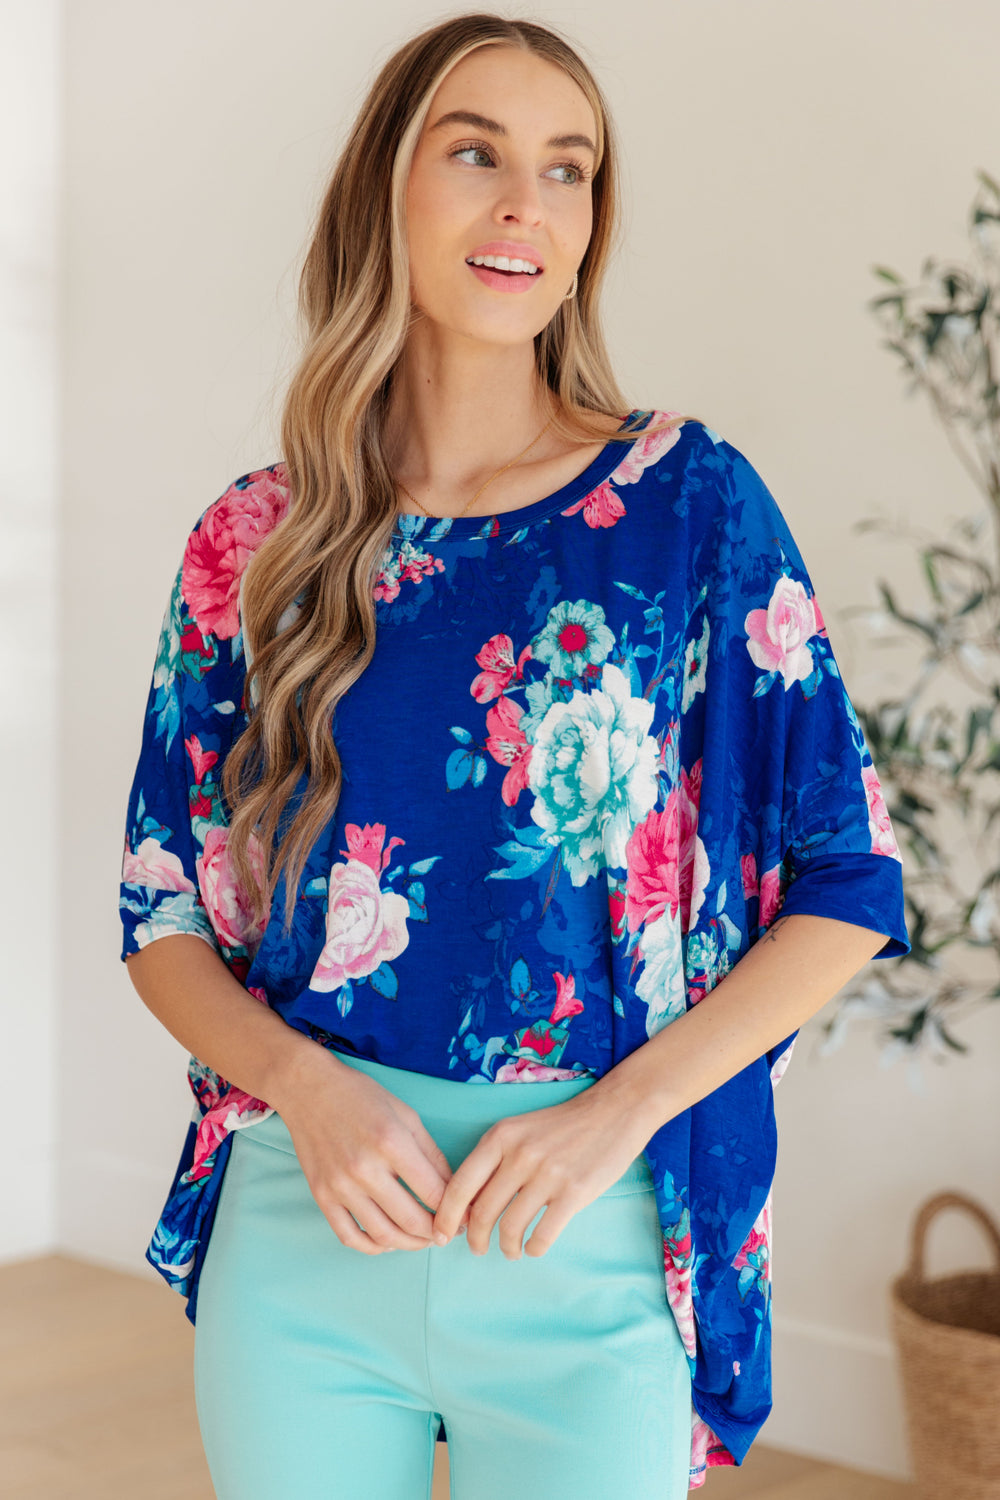 Essential Blouse in Royal and Pink Floral-Short Sleeve Tops-Inspired by Justeen-Women's Clothing Boutique in Chicago, Illinois